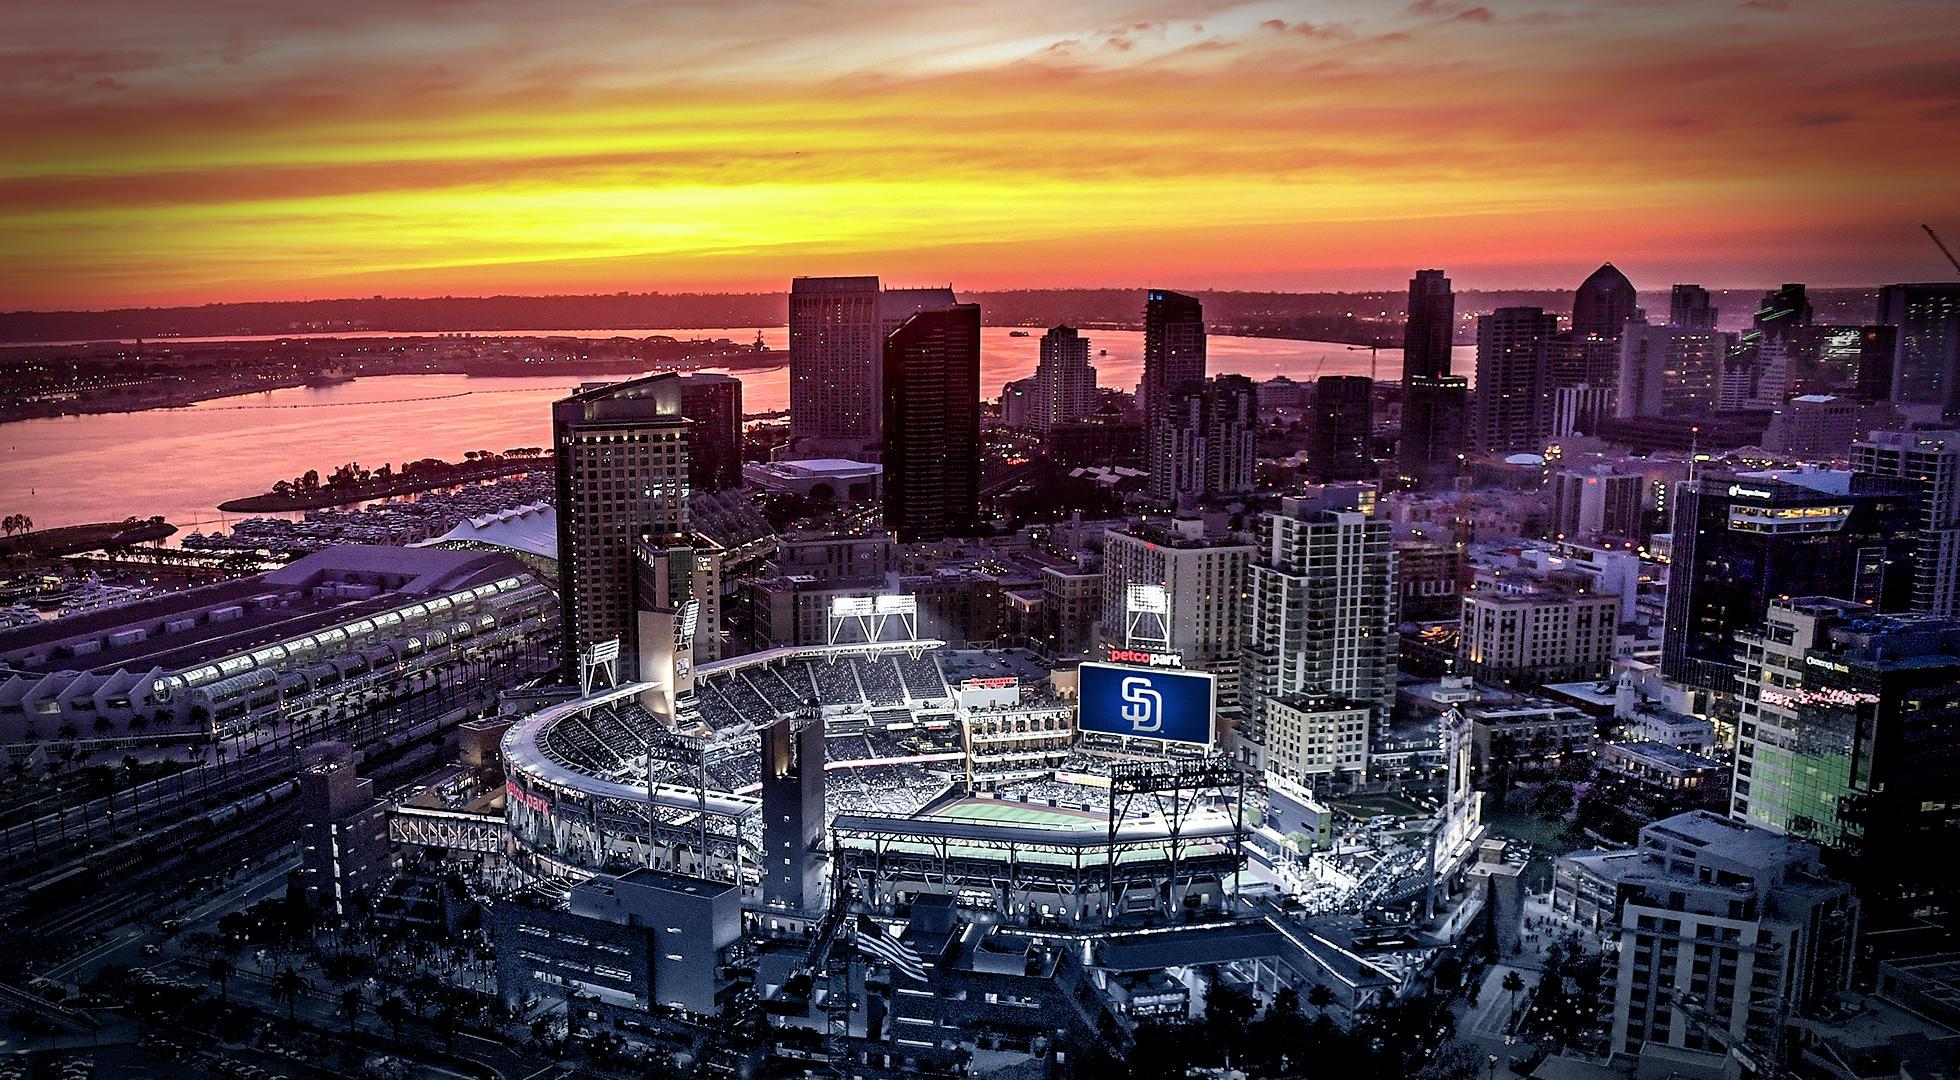 San Diego Padres Wallpapers 10